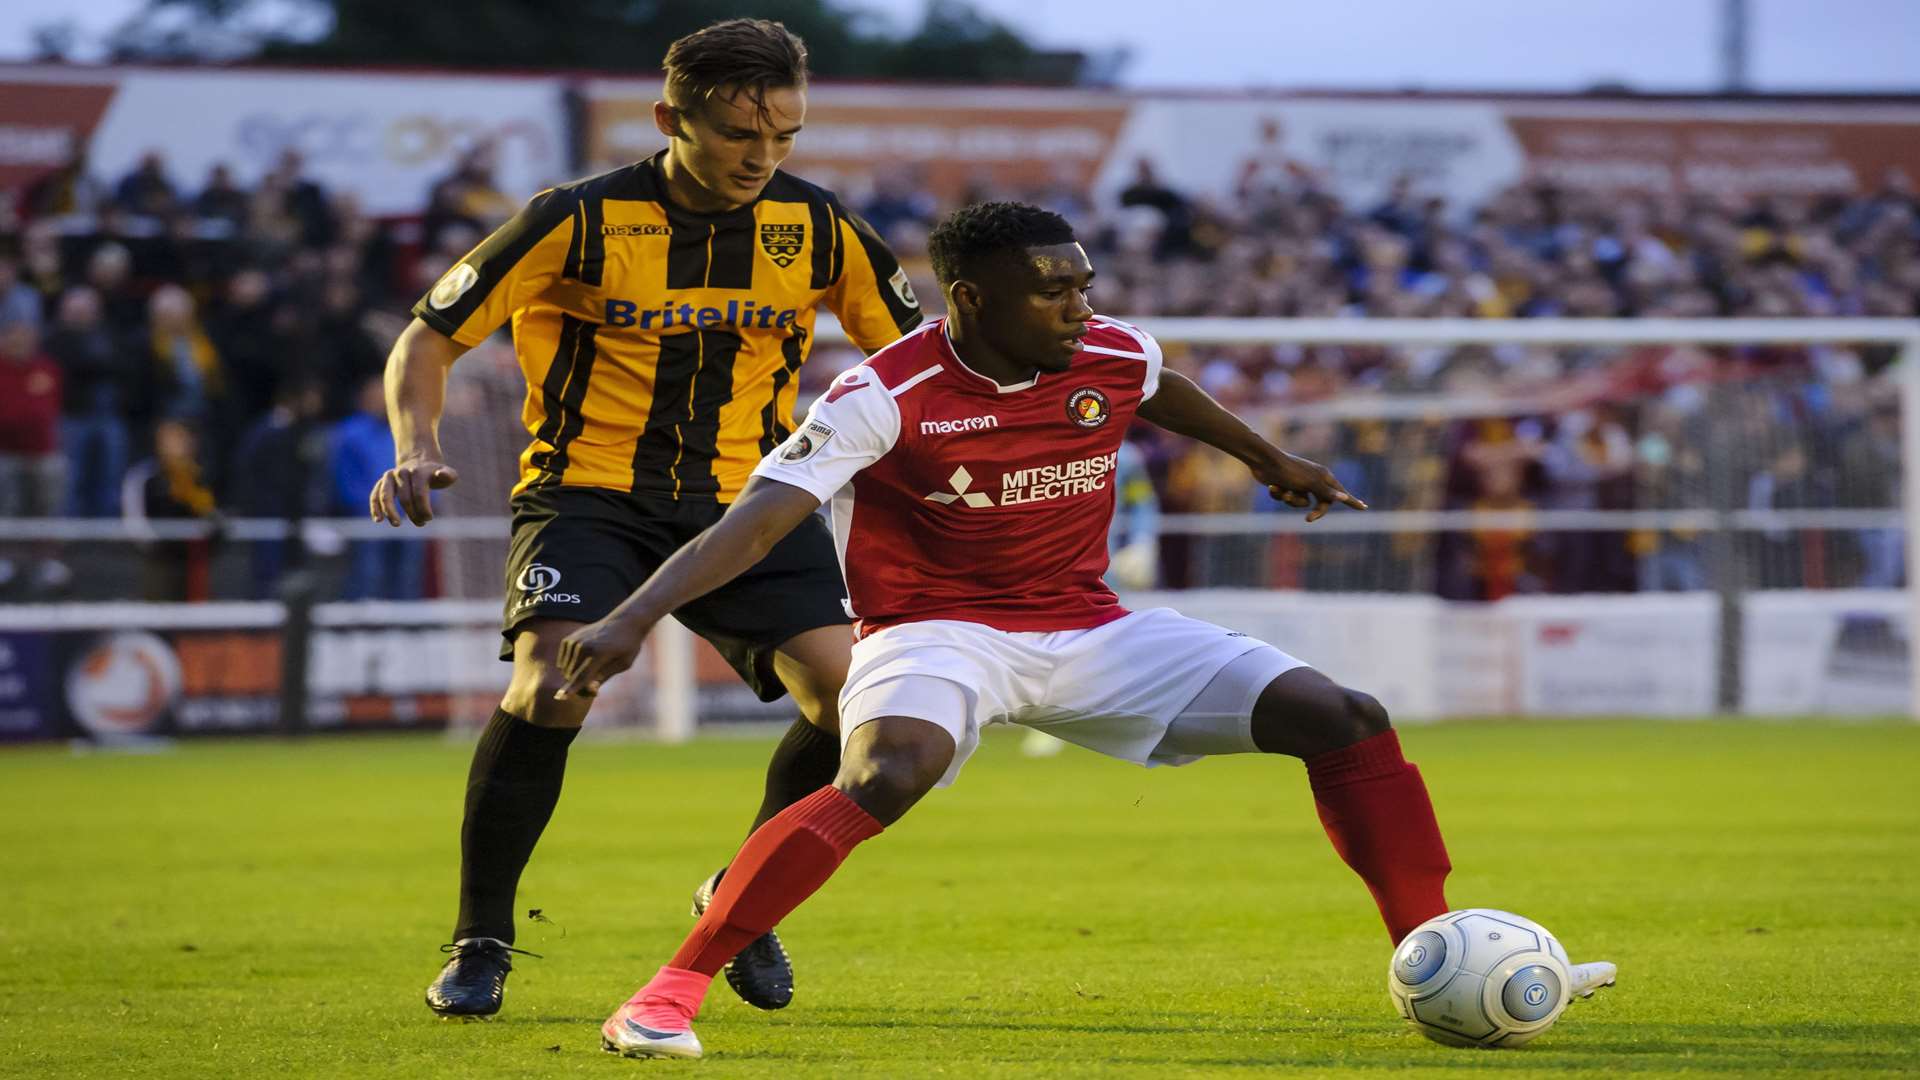 Darren McQueen has two goals to his name already Picture: Andy Payton